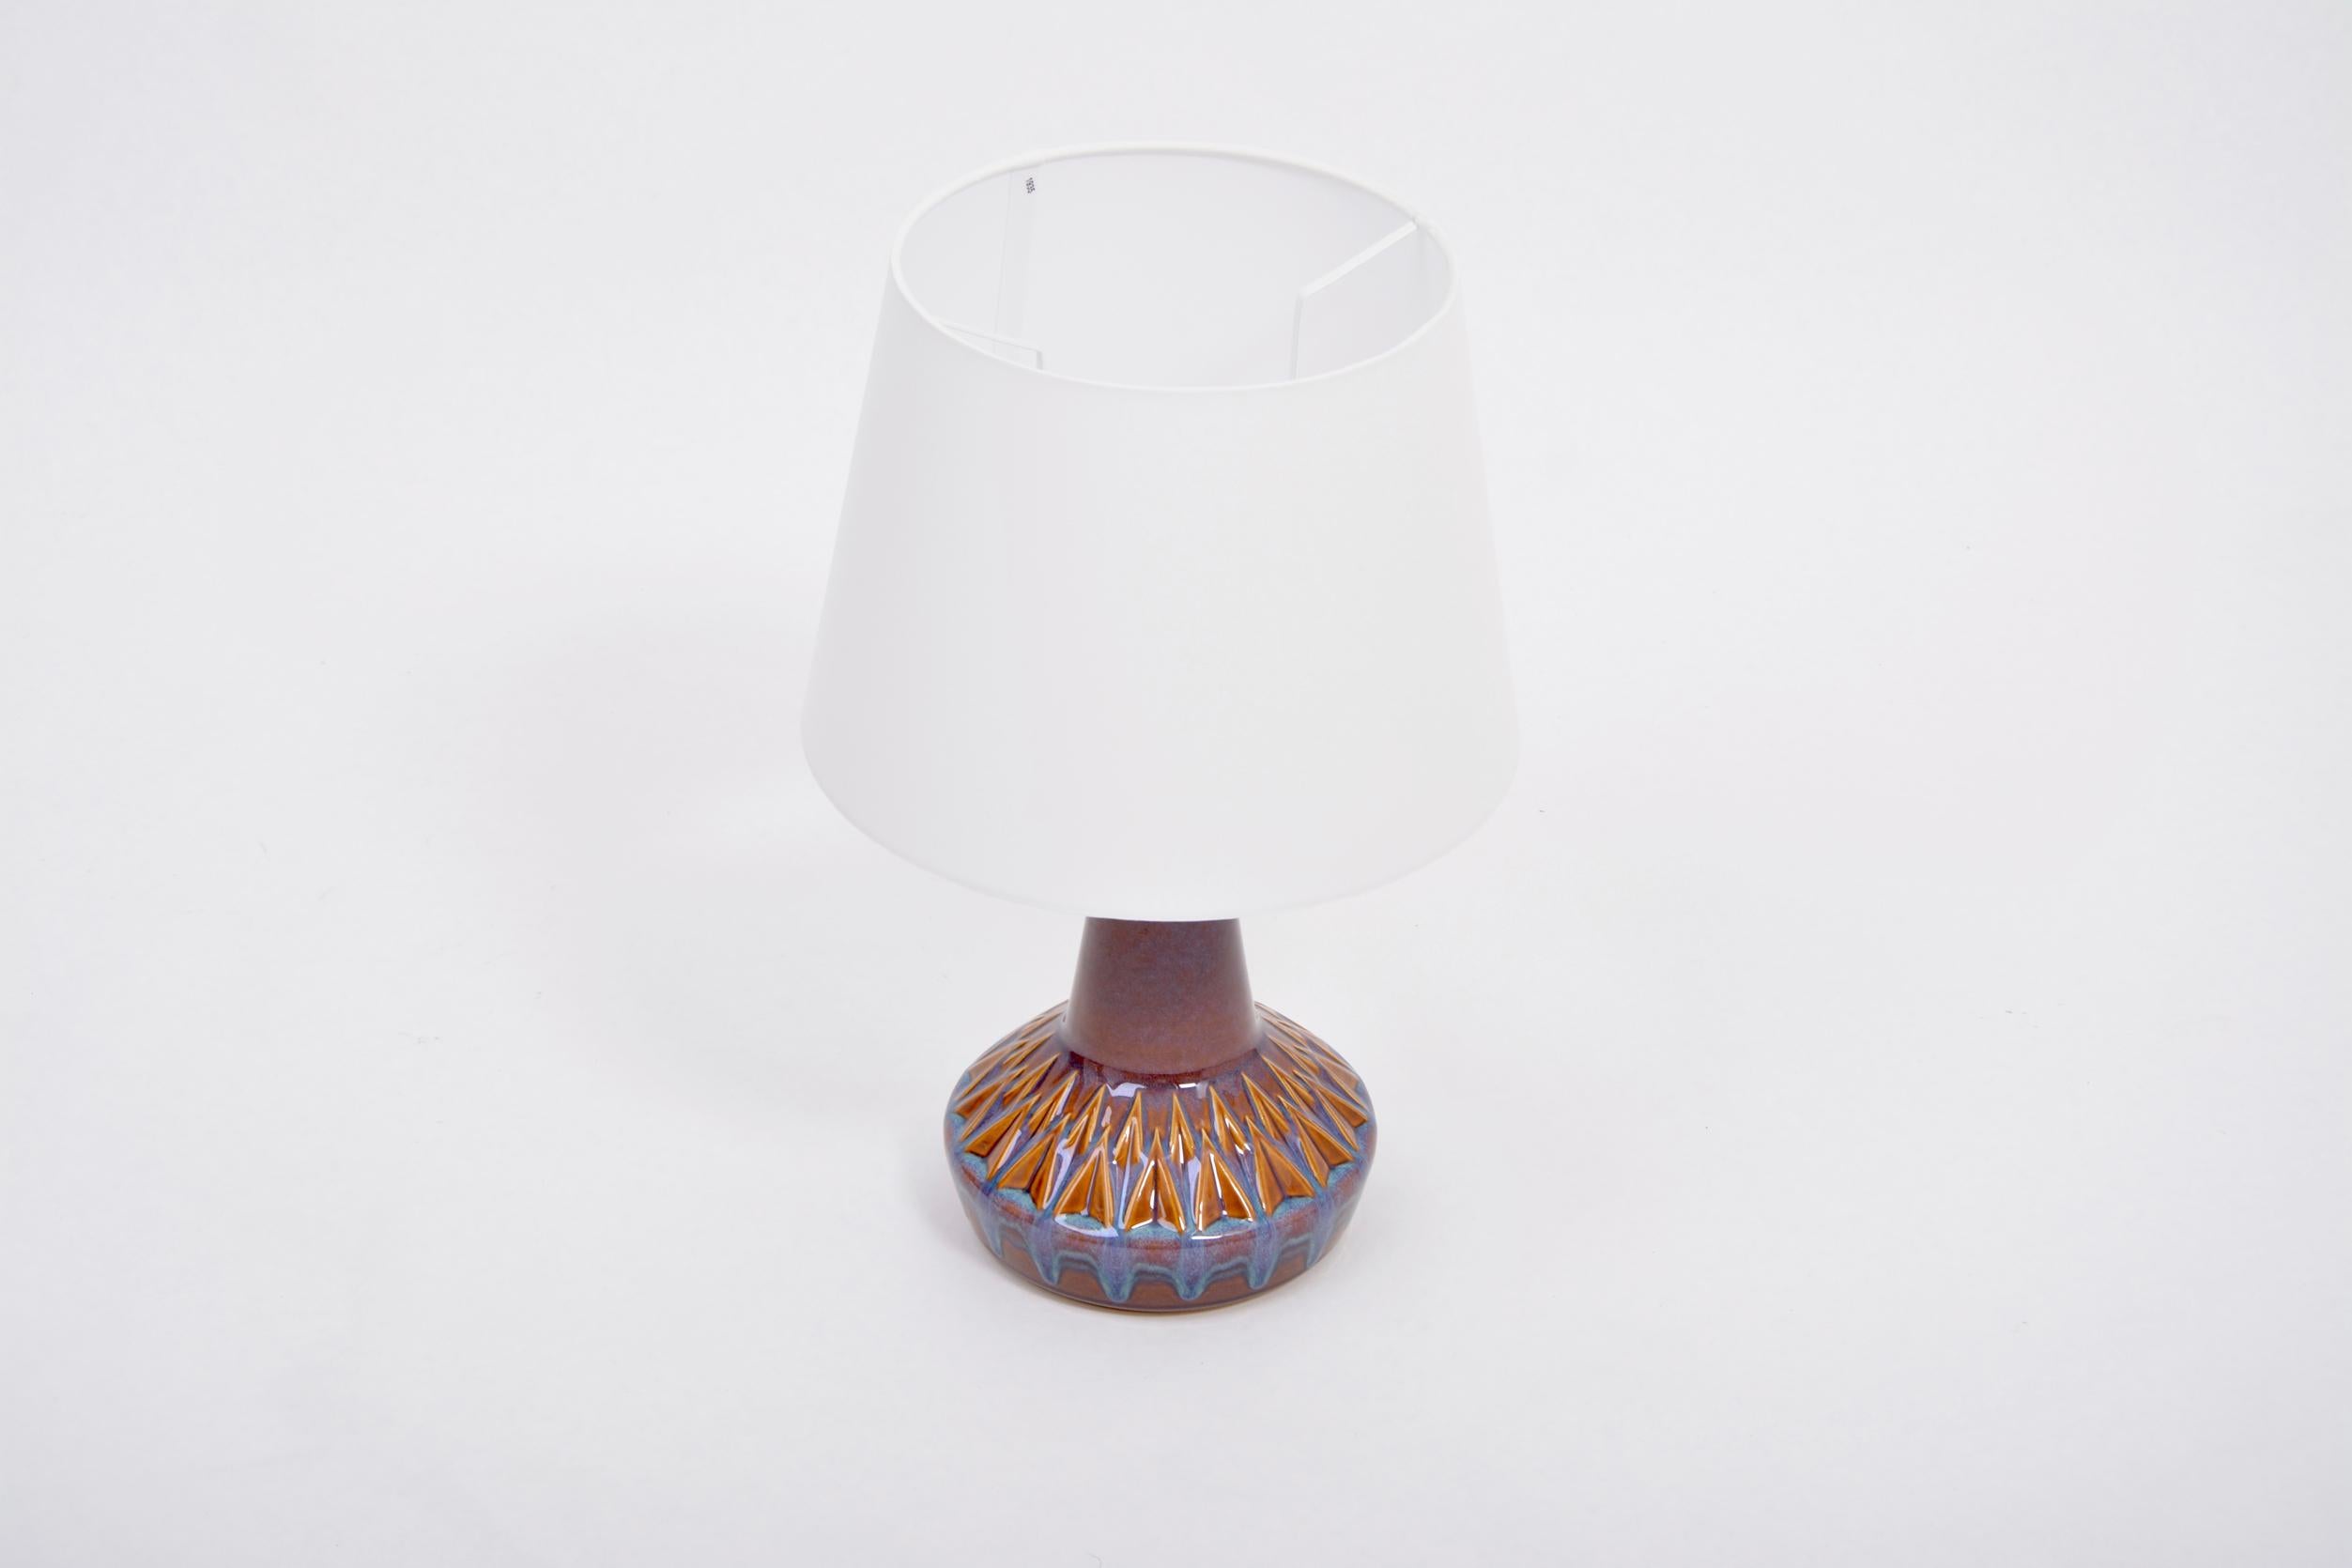 Danish Mid-Century Modern table lamp model 1058 by Soholm

Stoneware table lamp with geometric pattern to its base produced in Denmark by Soholm. Beautiful ceramic glazing in tones of brown and blue. The lamp has been rewired for European use and